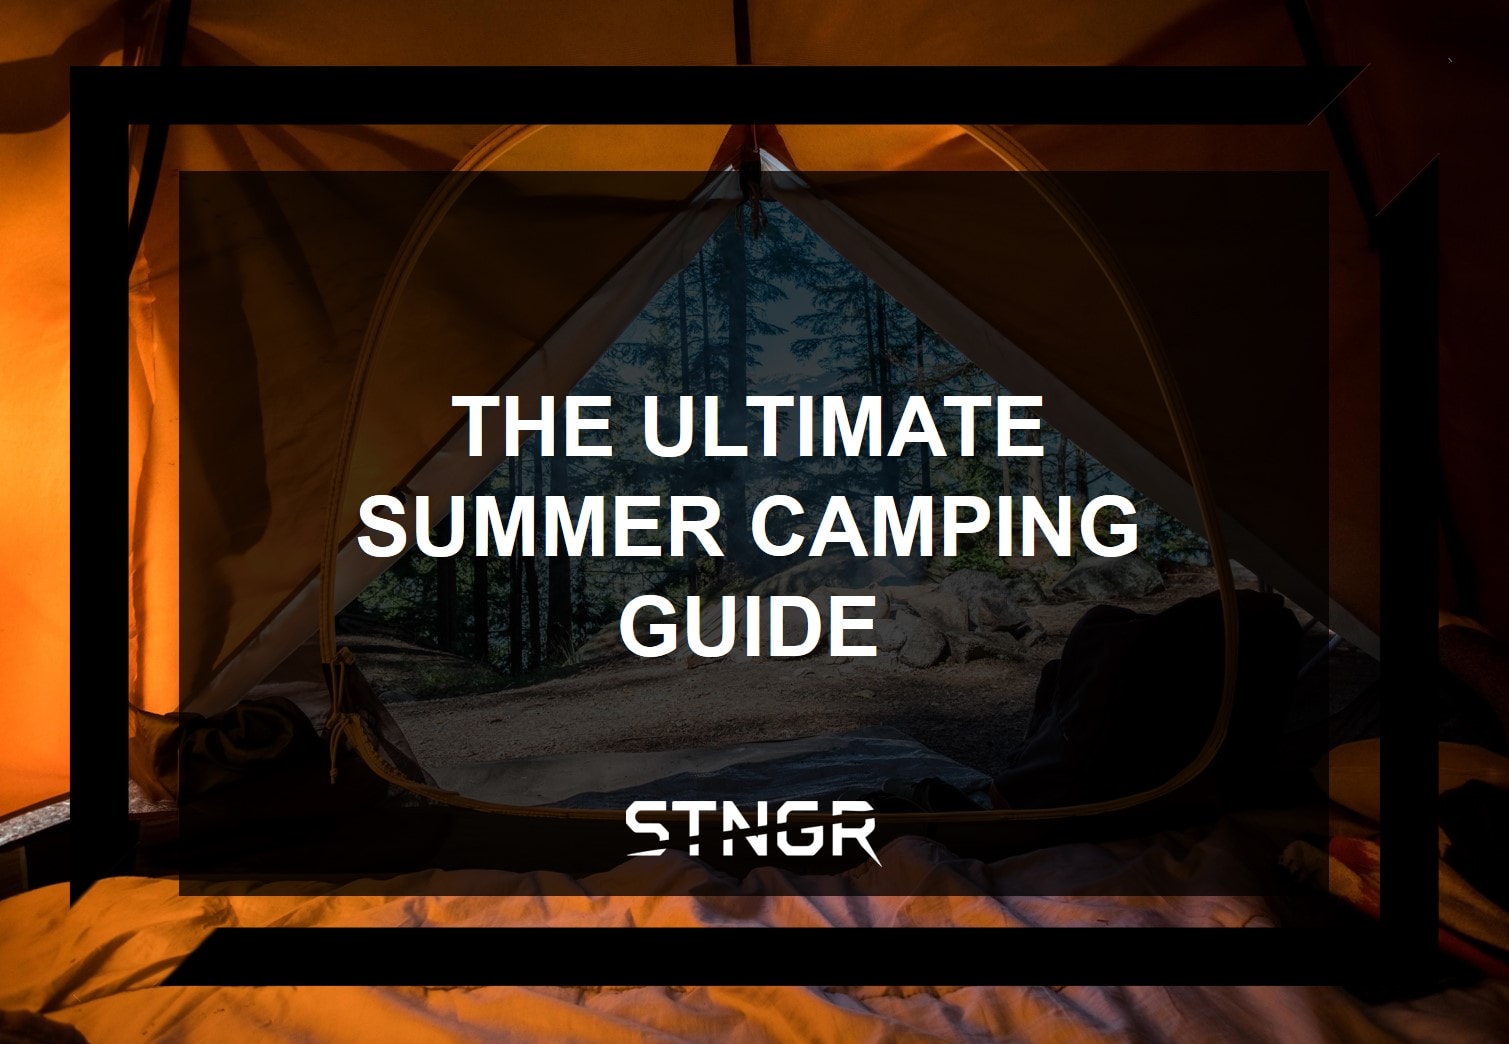 The Ultimate Summer Camping Guide